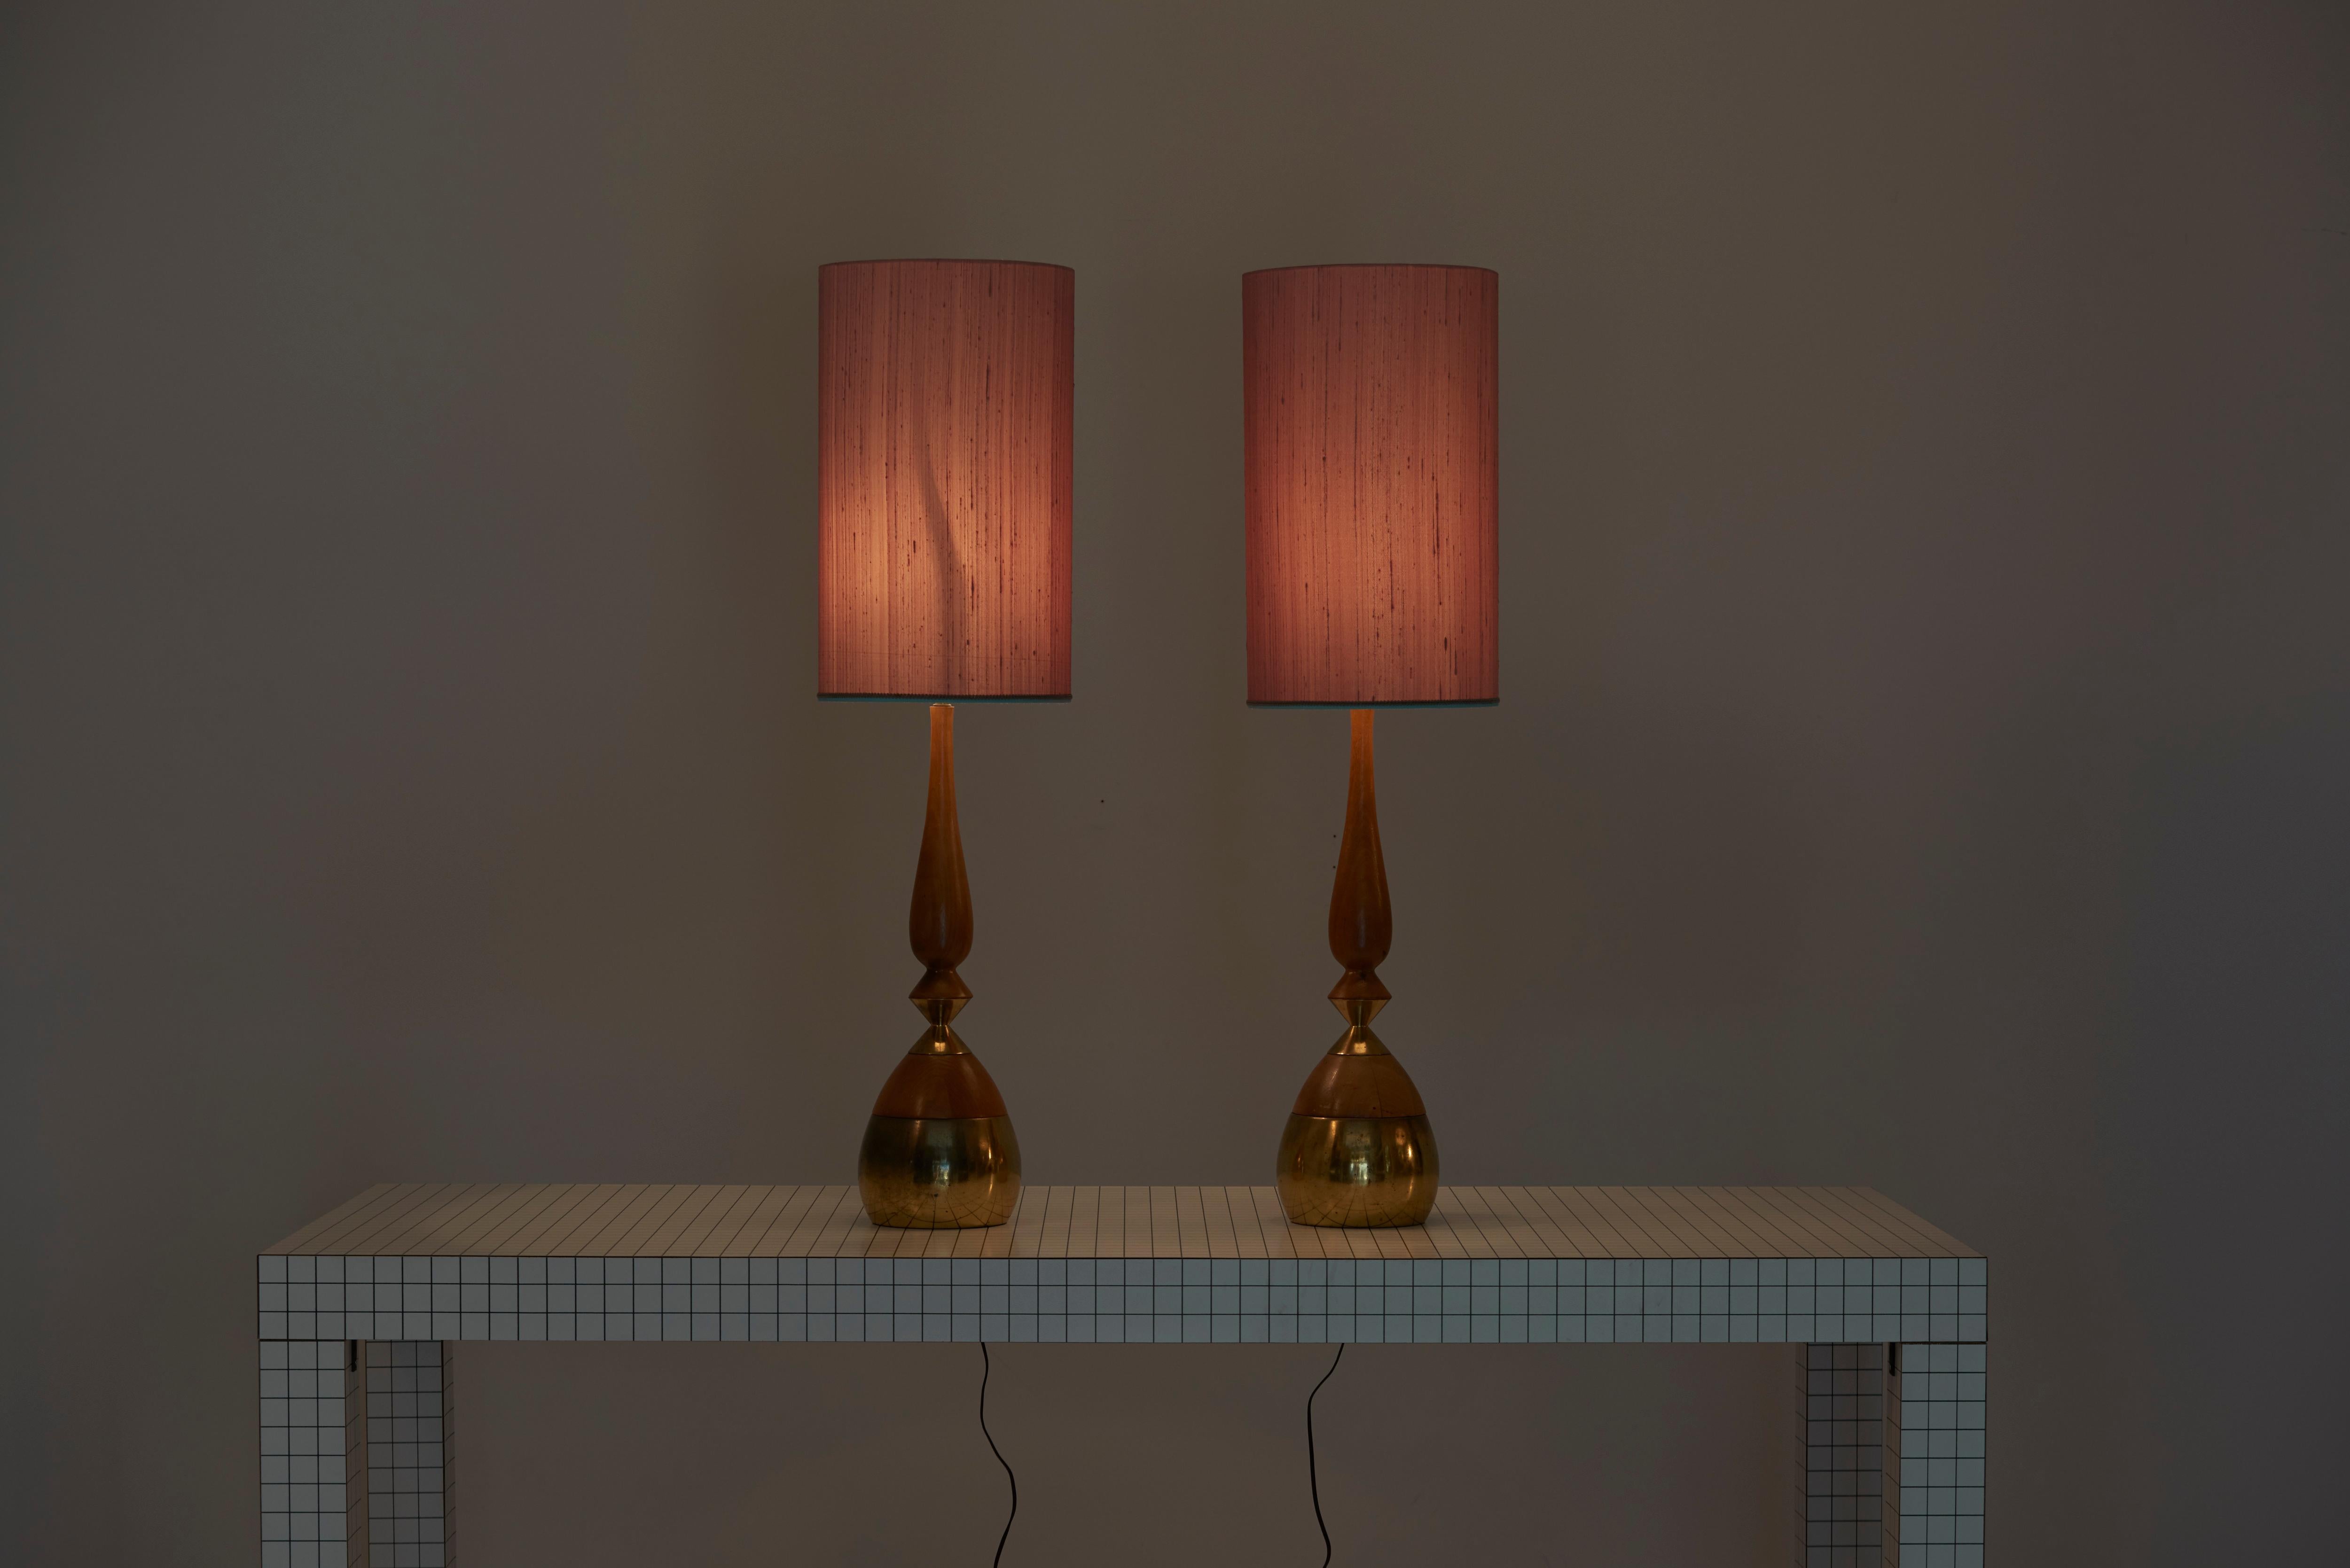 Pair of table lamps in brass and walnut, designed by Tony Paul and manufactured by Westwood Lighting.
Including new custom lampshades.

1 x E27 socket / each.

Please note: Lamp should be fitted professionally in accordance to local